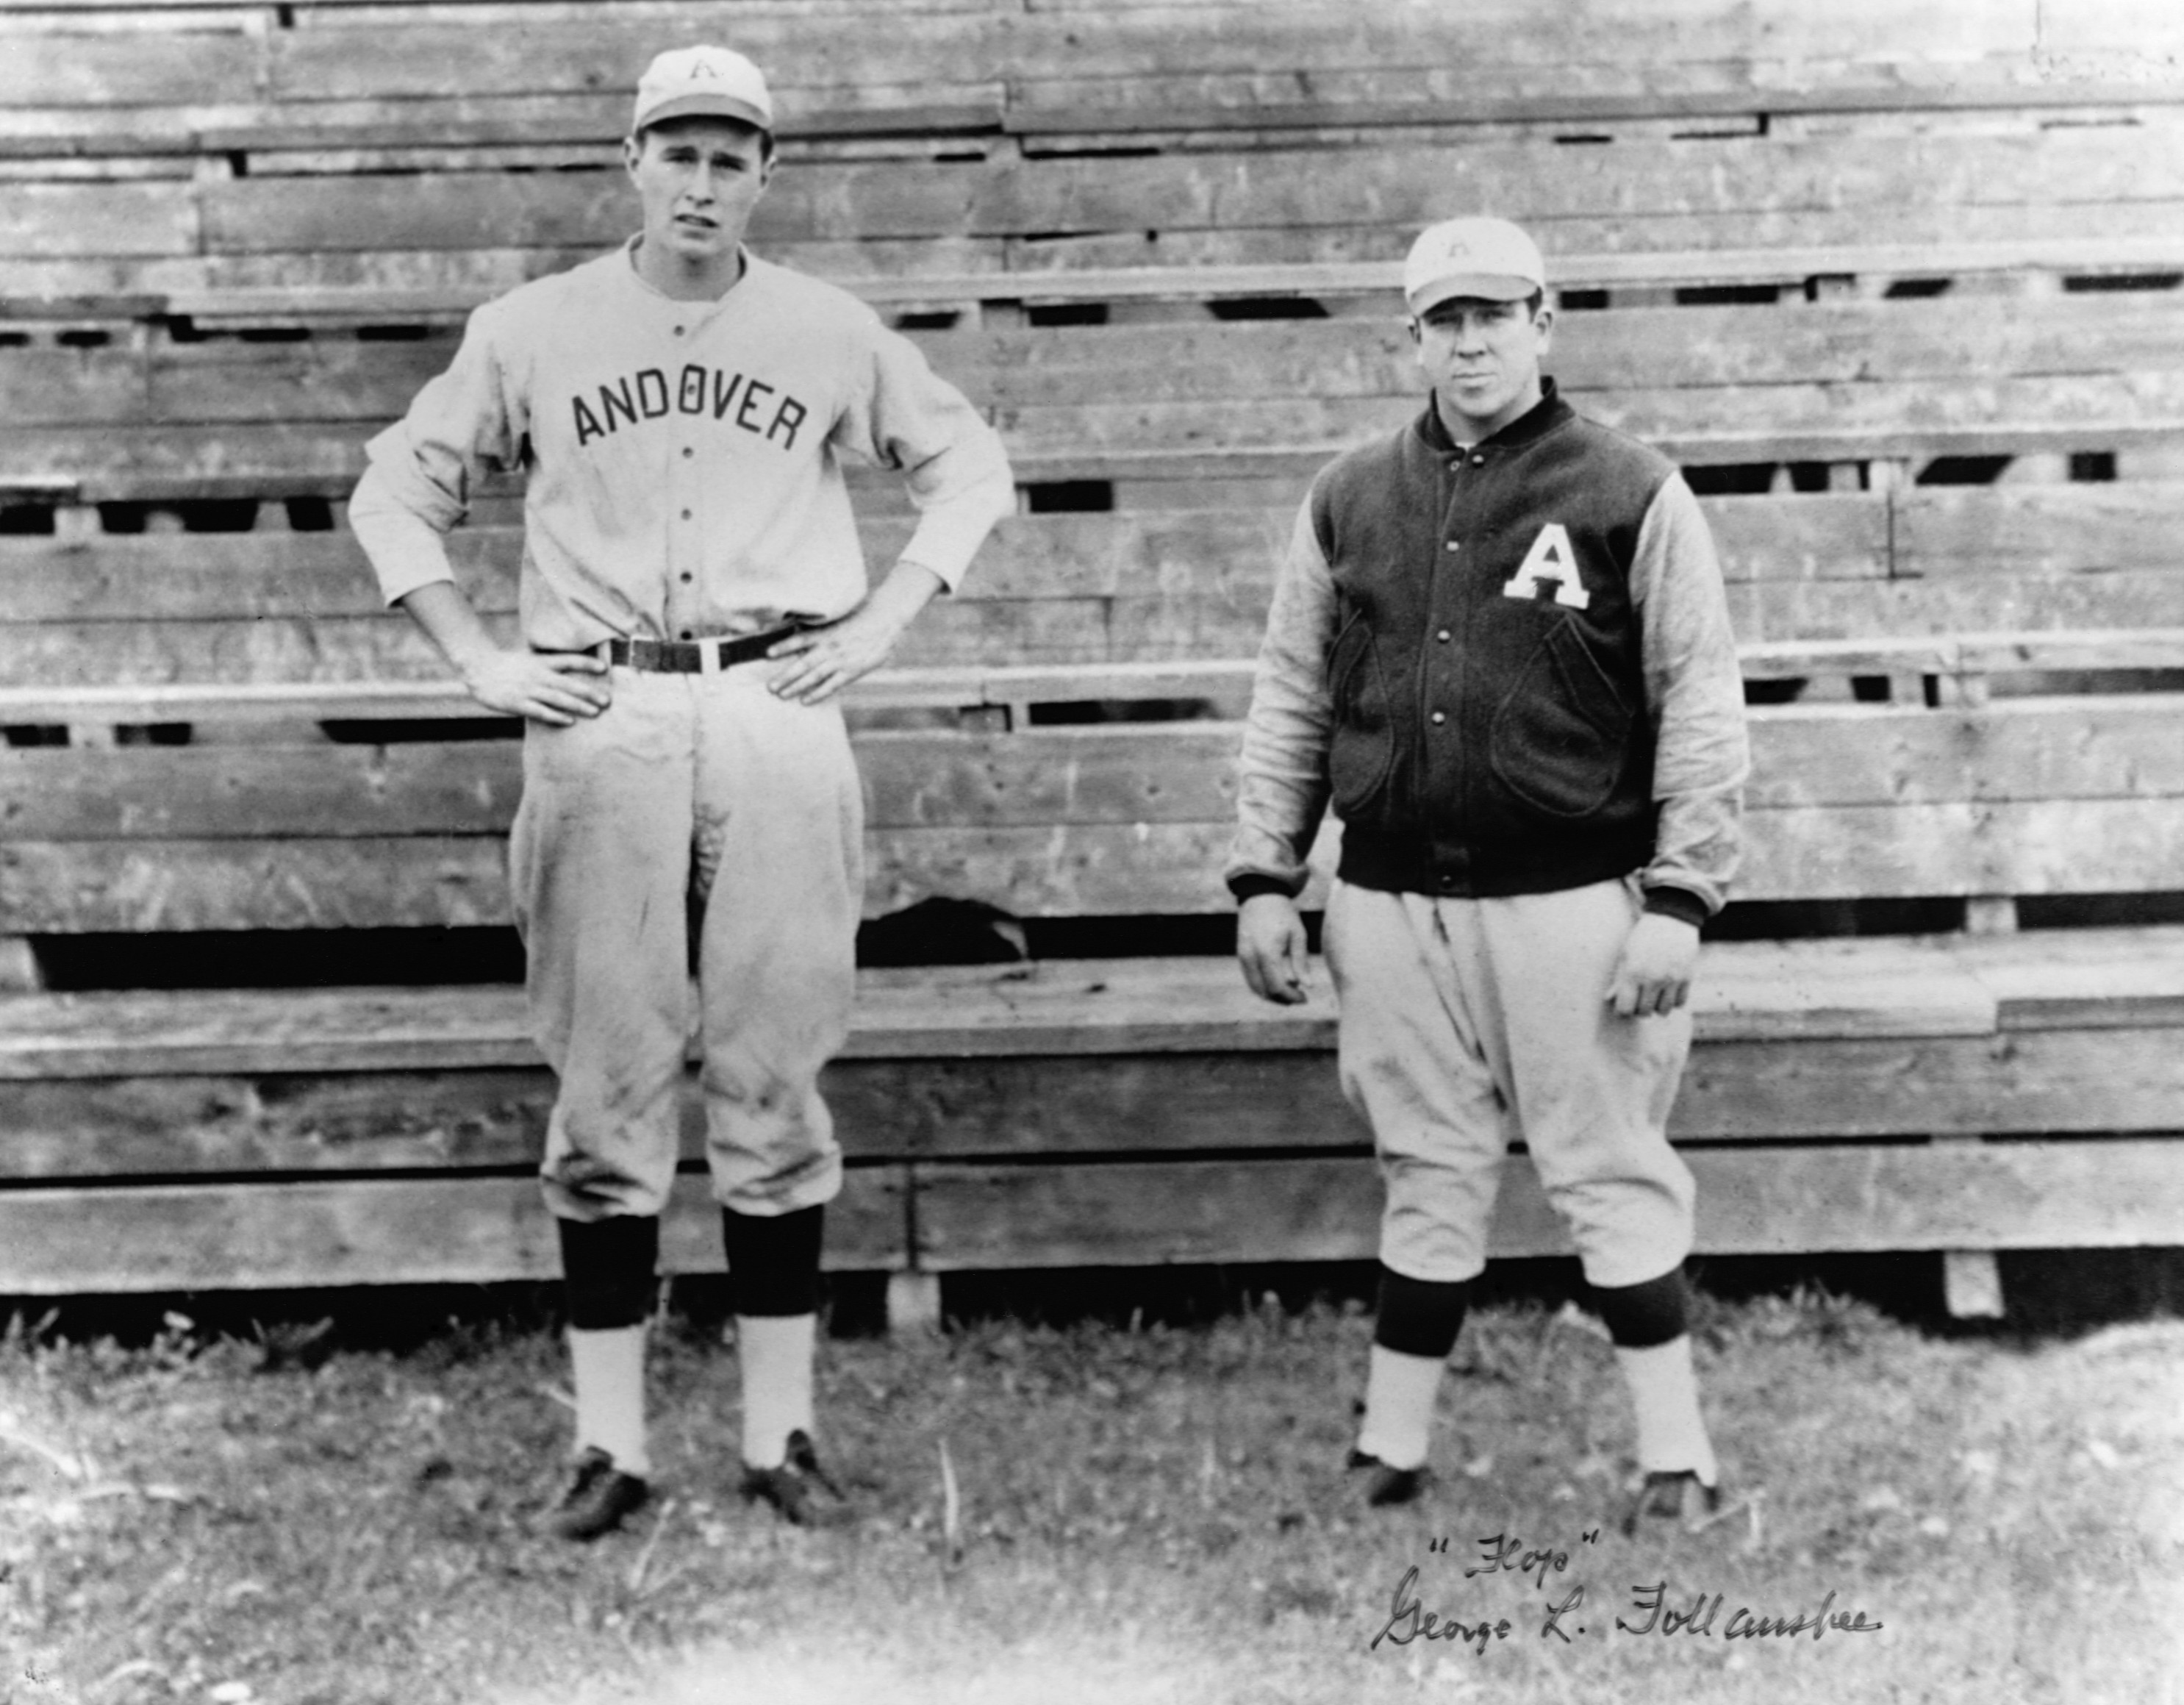 A portrait of an adolescent George H.W. Bush and a teammate in their baseball uniforms. Bush was the captain of the baseball team at Phillips Academy, where he attended from 1937 to 1942.